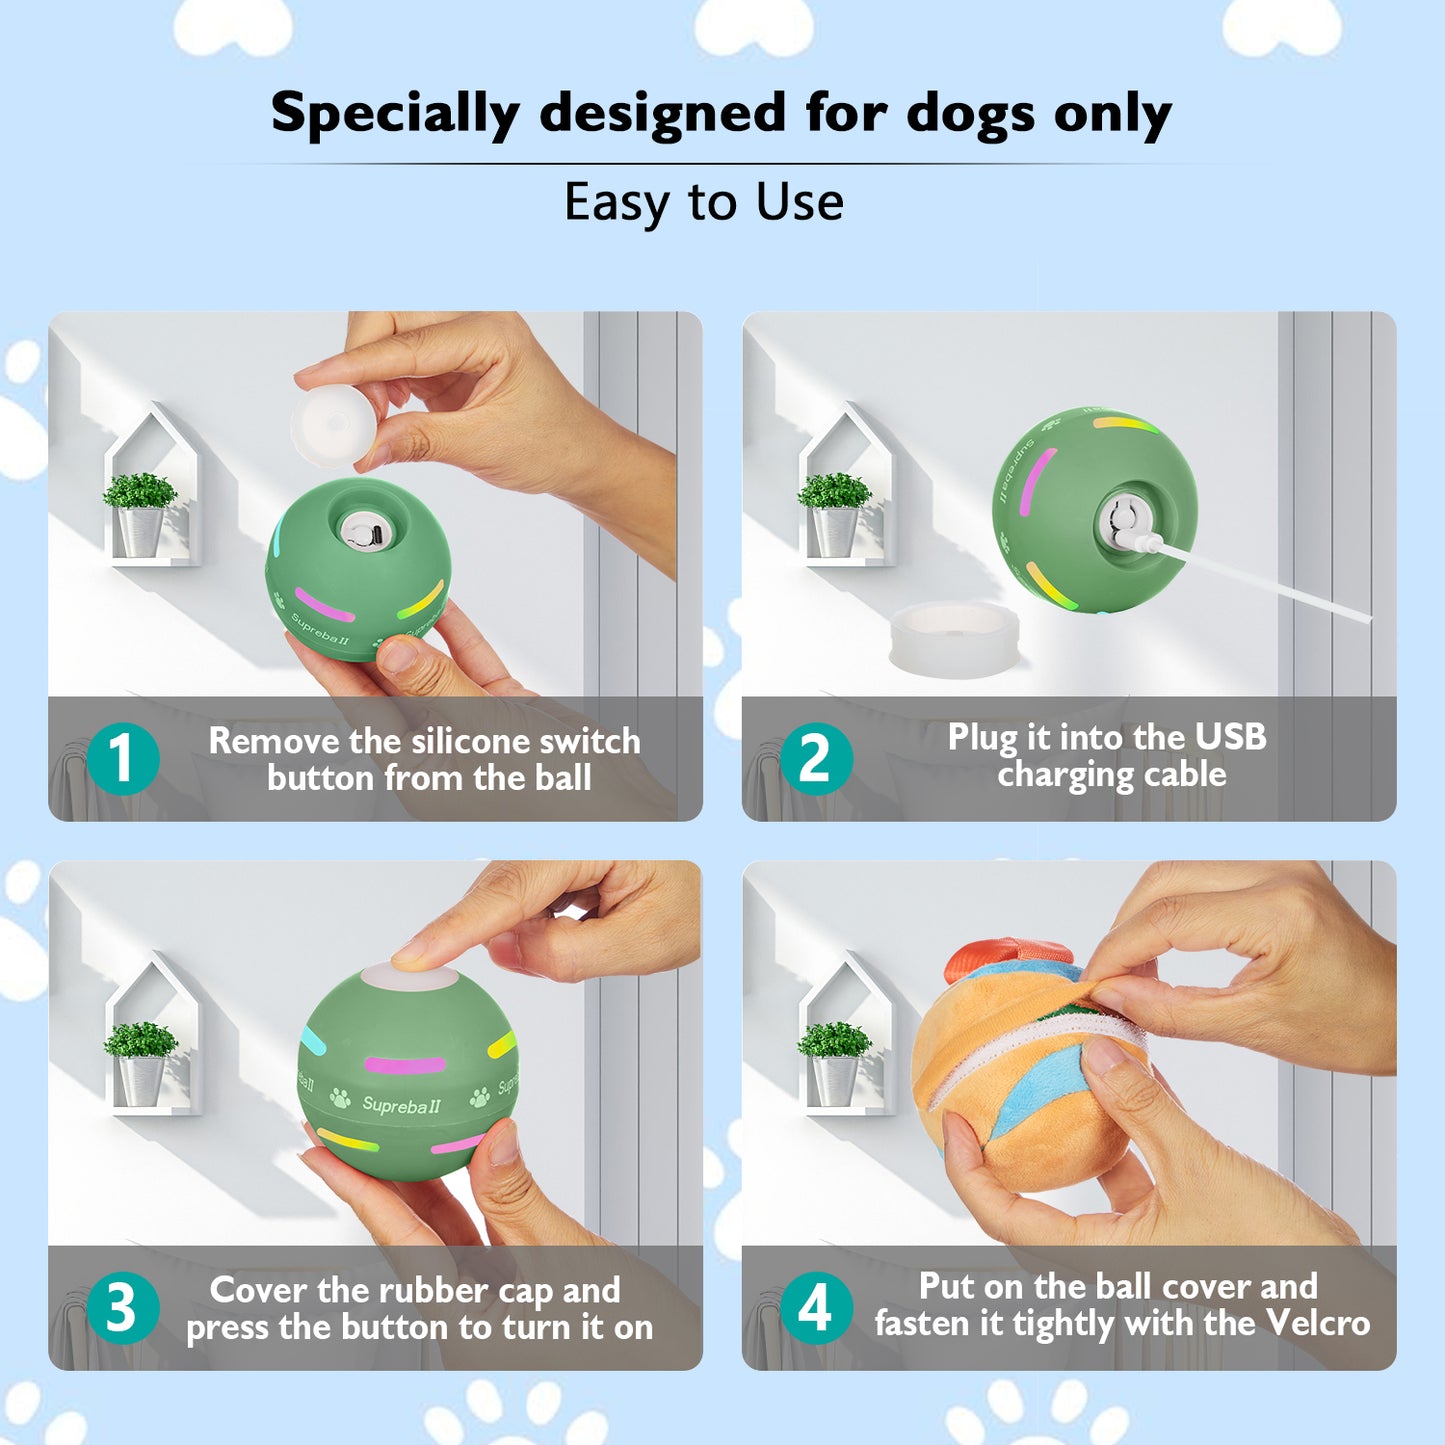 BARHOMO Dog Balls,The 3rd Generation Interactive Toys for Puppy/Small/Medium/Large Dogs,Improved Dog Rolling Effect Tennis Ball with Strap, Tough Motion Activated Automatic Moving Dog Ball Toys (Copy)